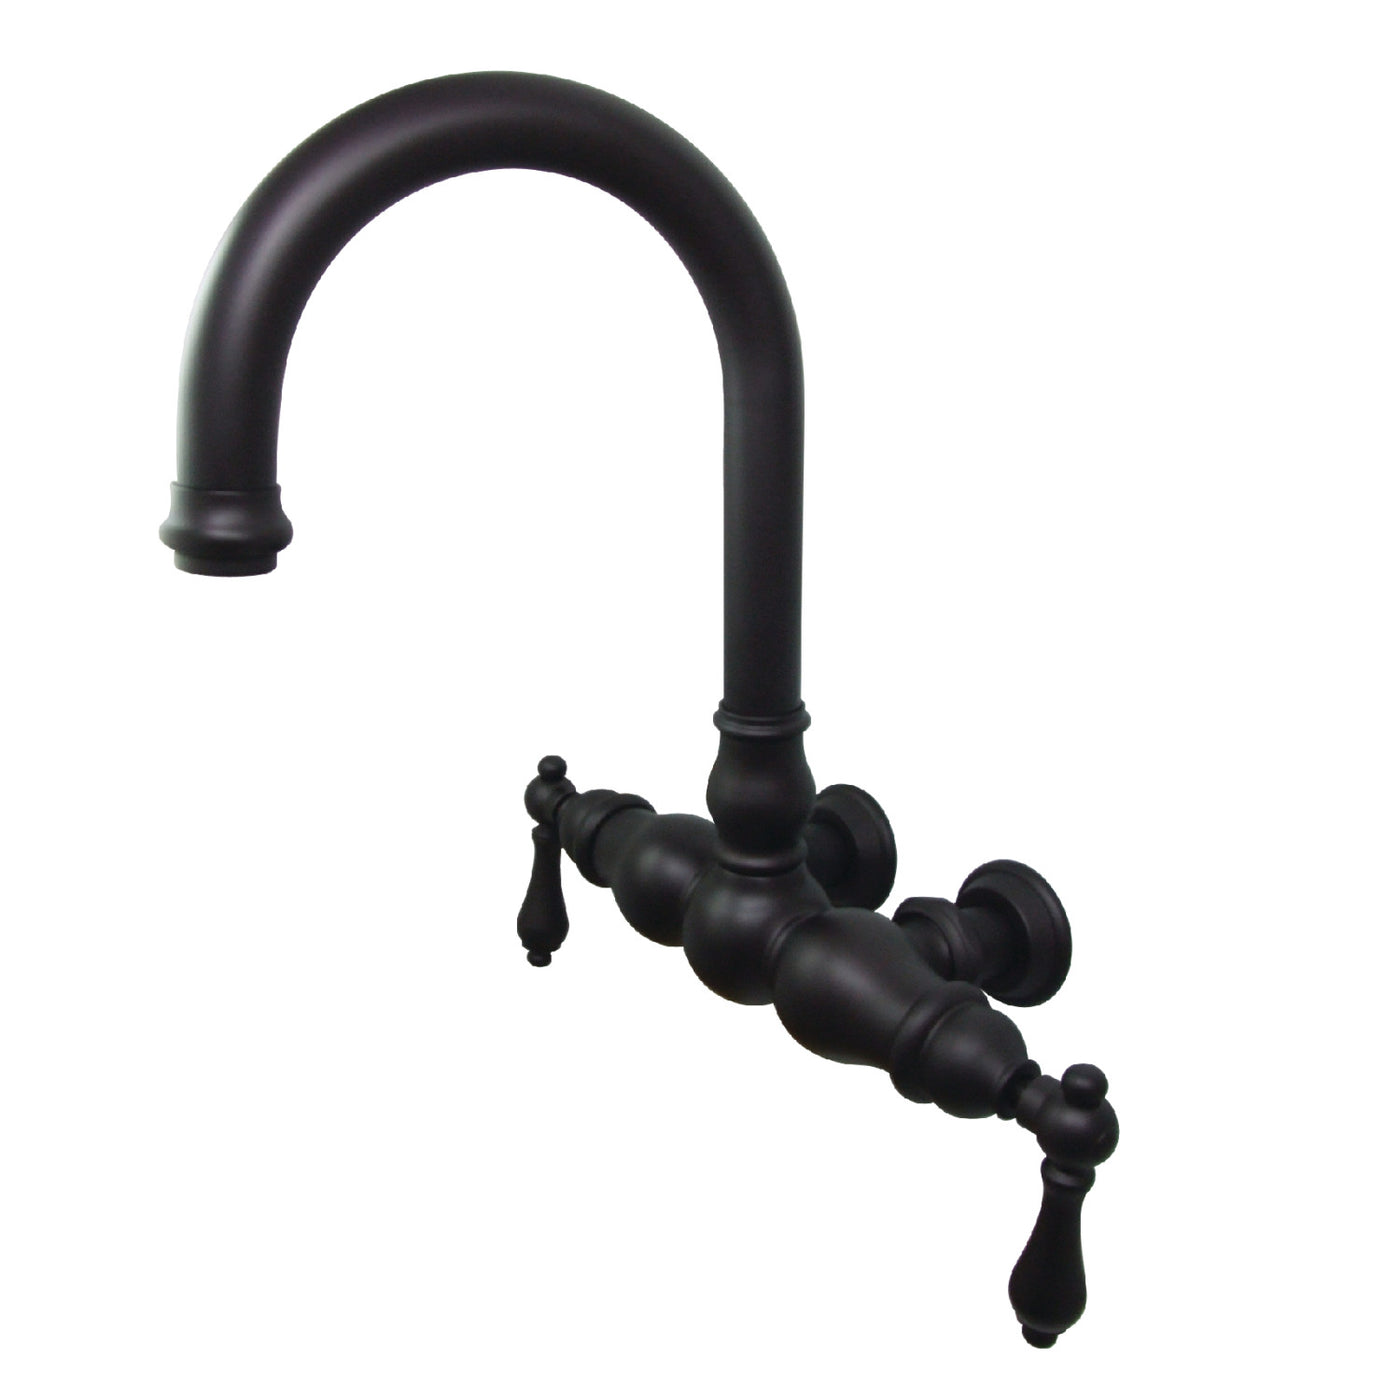 Elements of Design DT30015AL 3-3/8-Inch Wall Mount Tub Faucet, Oil Rubbed Bronze